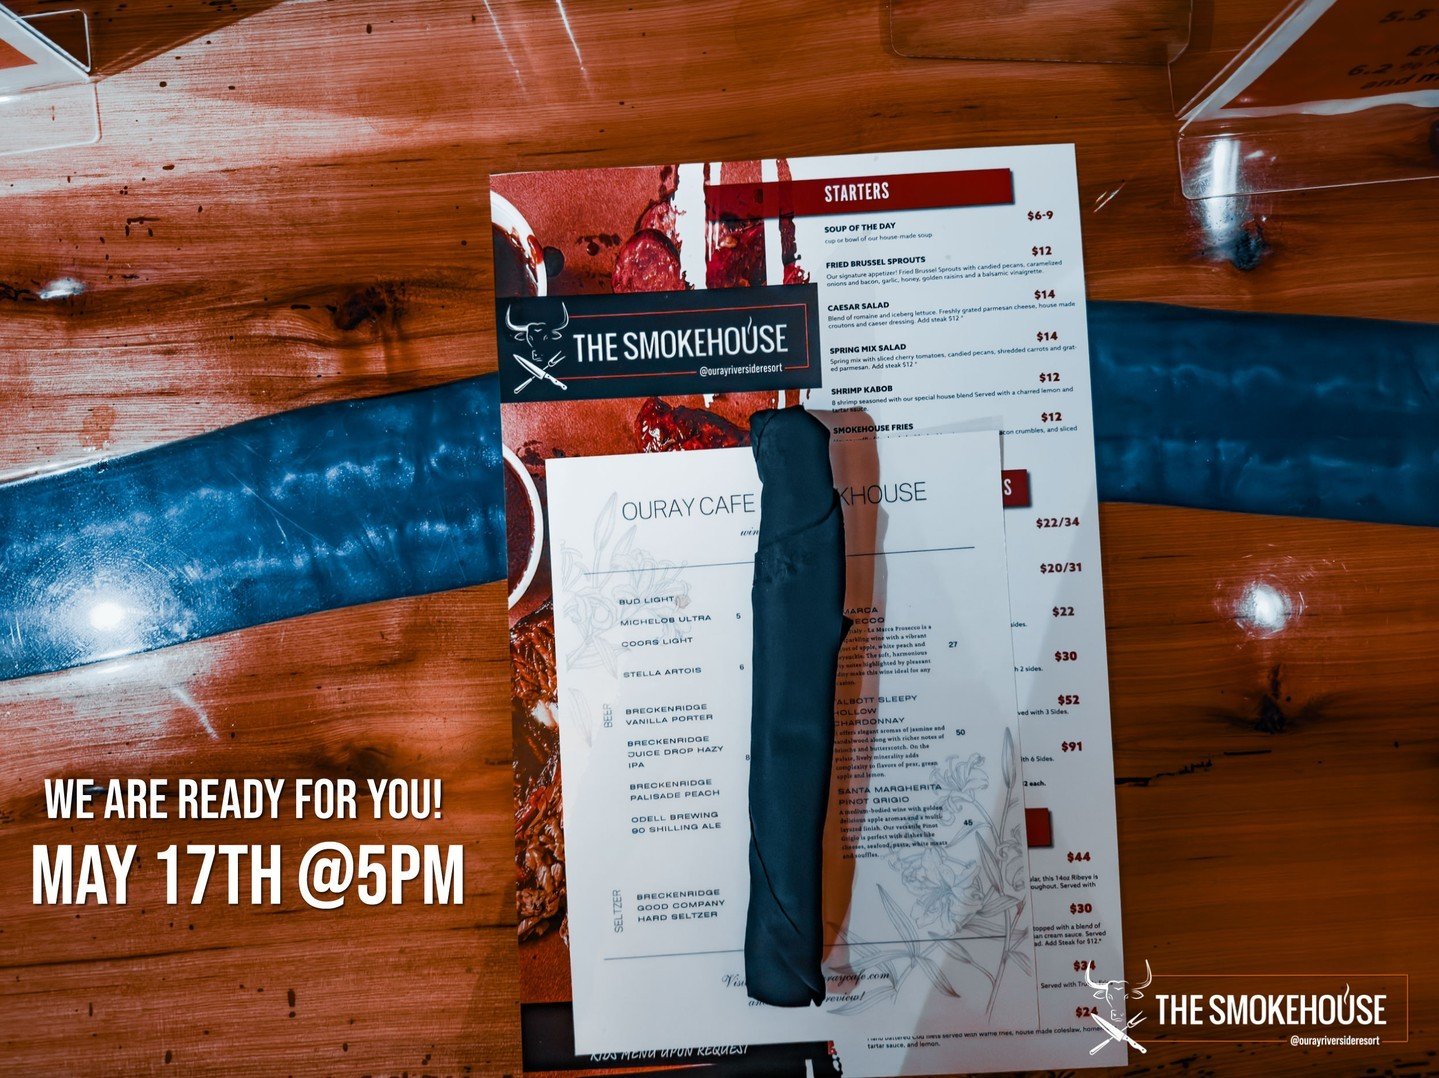 Your table will be ready!  Spend Friday the 17th with Chef Rene as he reopens the kitchen for the summer season with all of your Smokehouse favorites. 

#ouray #ouraycolorado #chefrene #smokehousefavorites